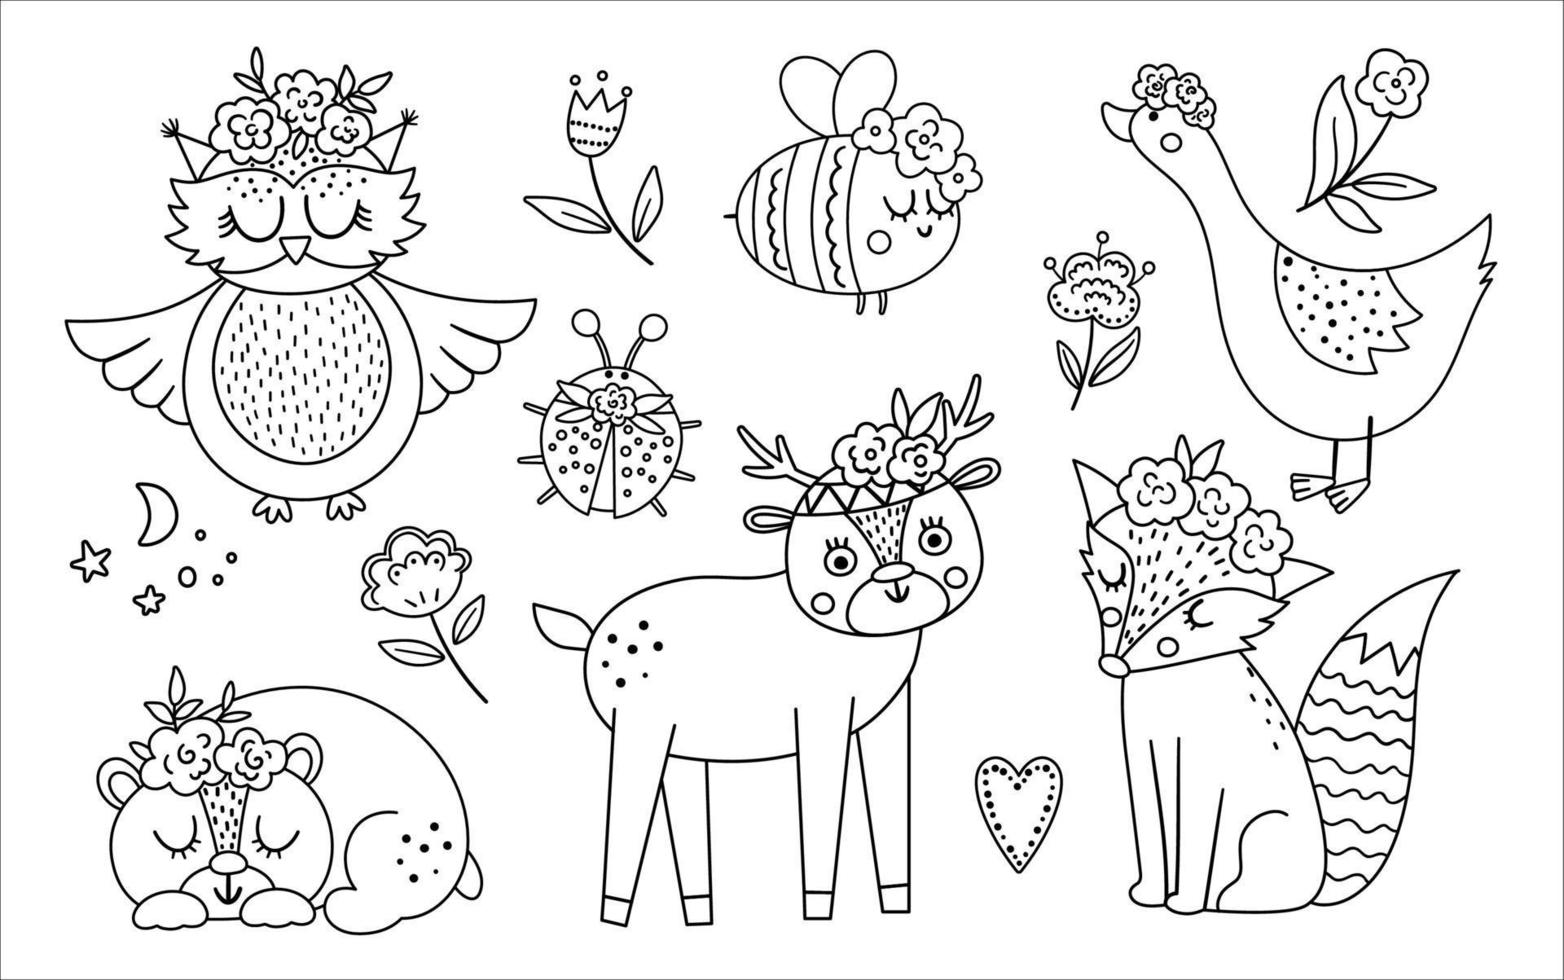 Vector black and white woodland animals, insects and birds collection. Boho line forest set. Bohemian fox, owl, bear, deer, ladybug, goose with flowers on heads. Celestial clip art pack